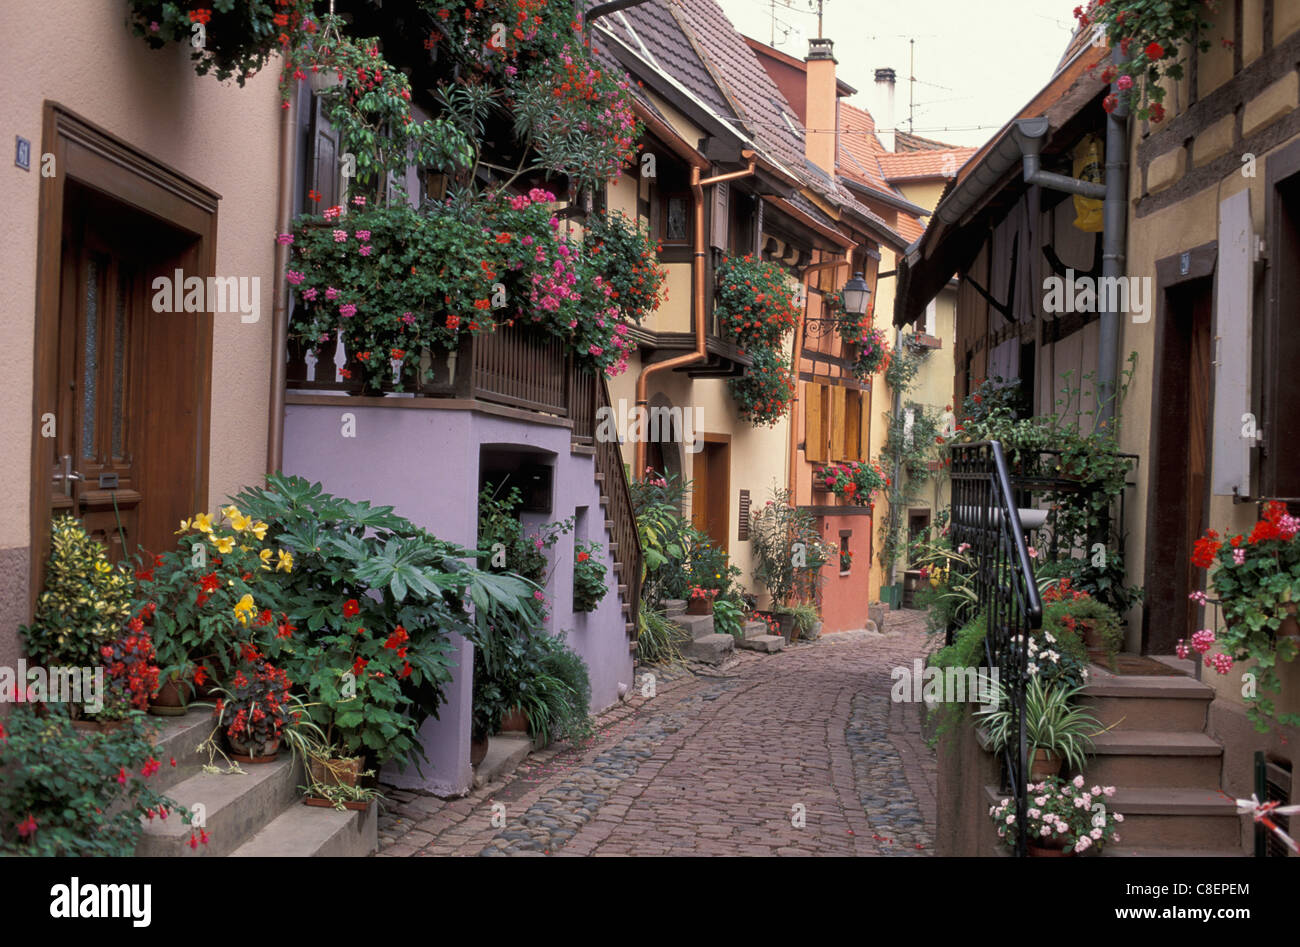 Eguisheim, Alsace, France, Europe, street, flowers, buildings, old town, Stock Photo